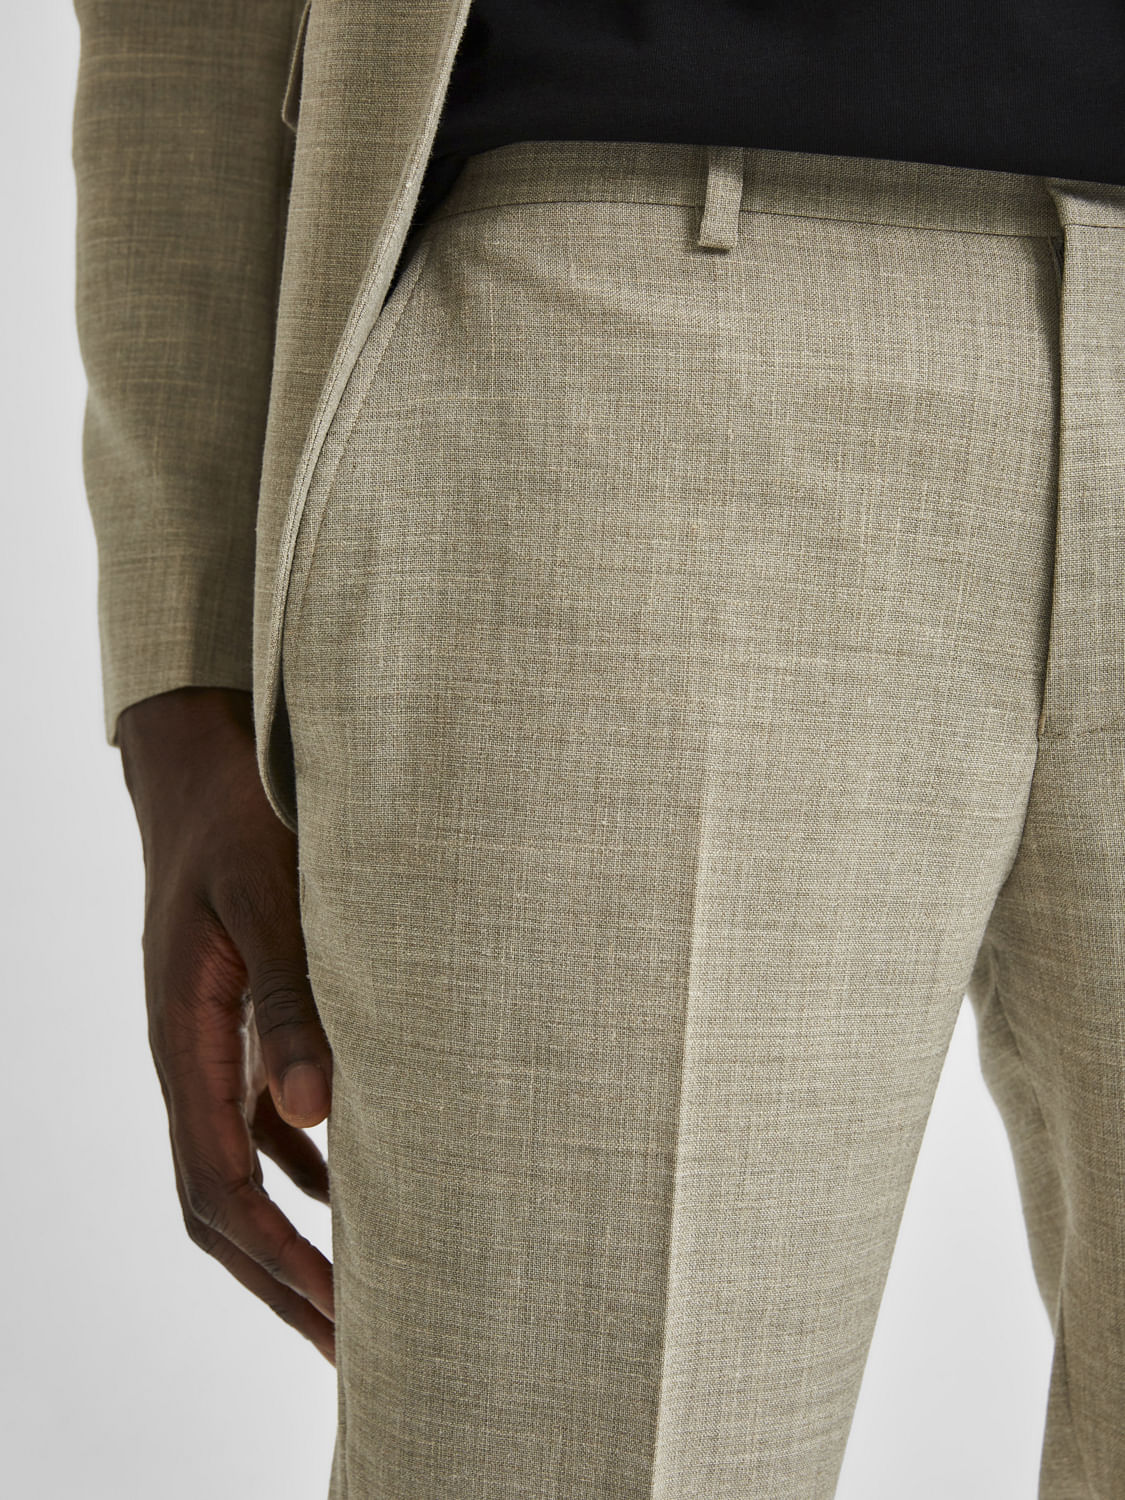 Men's Suit Trousers | Formal & Casual | SELECTED HOMME